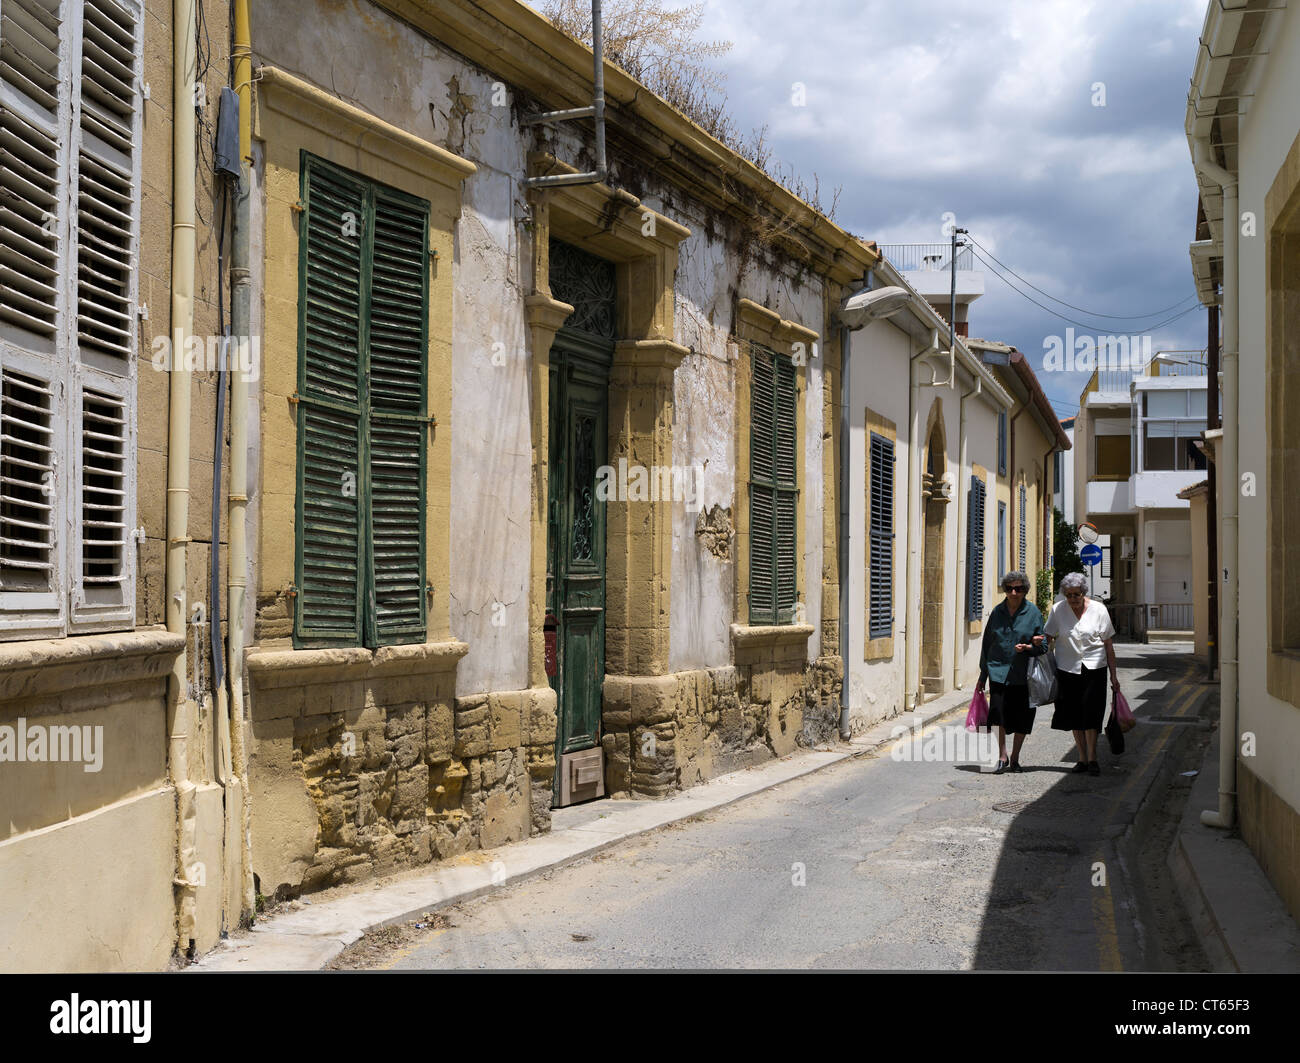 dh Old town Lefkosia street NICOSIA SOUTH CYPRUS Houses two old greek Cypriot women elderly people Stock Photo